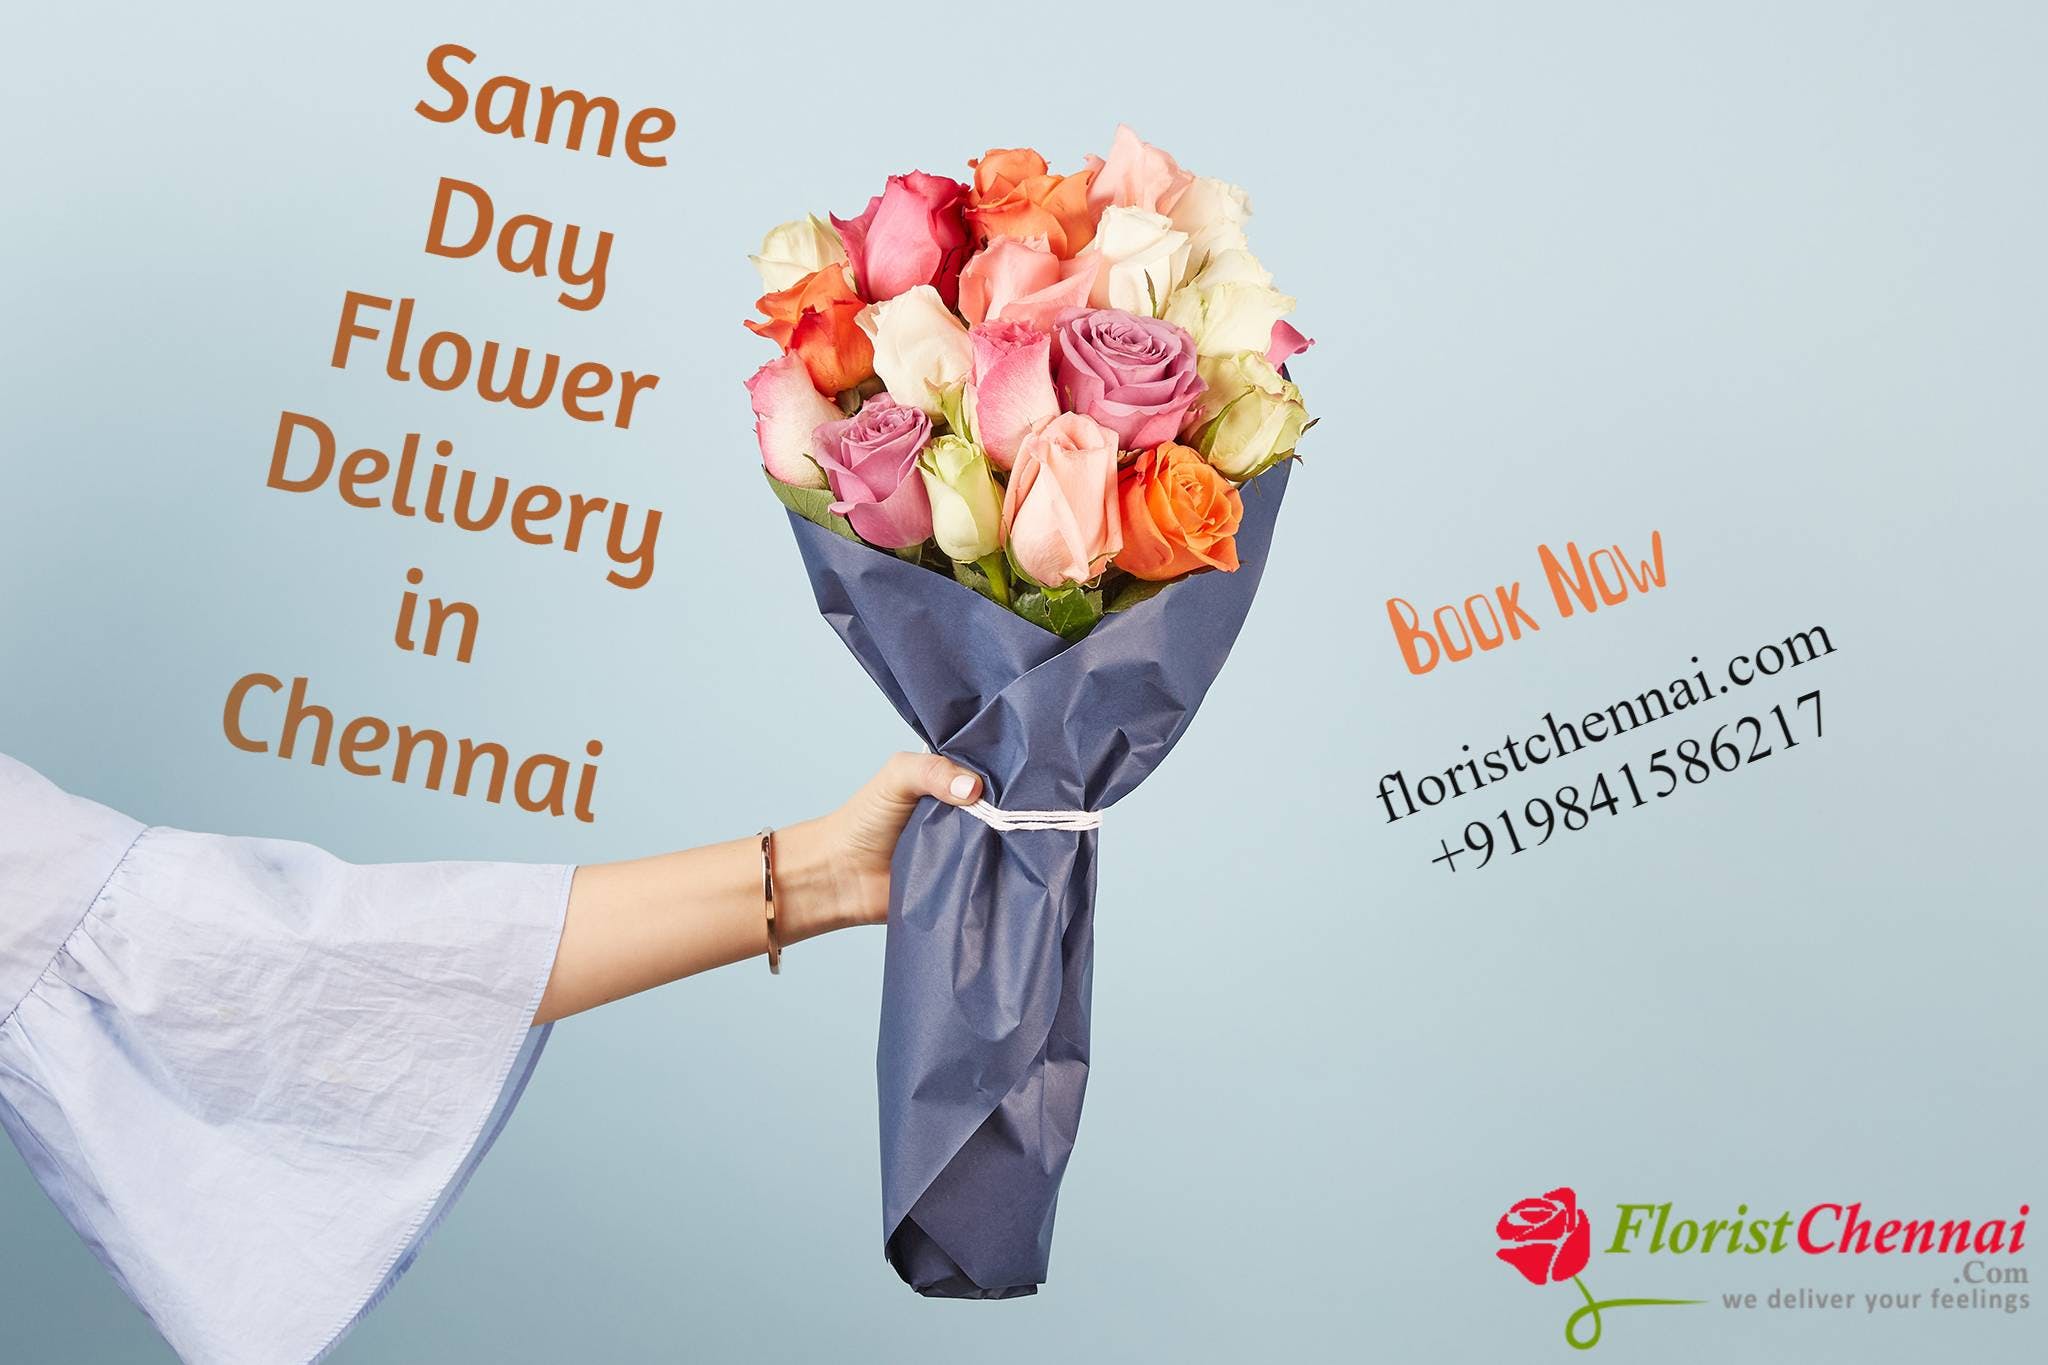 Cake and Flower Delivery in Chennai media 1